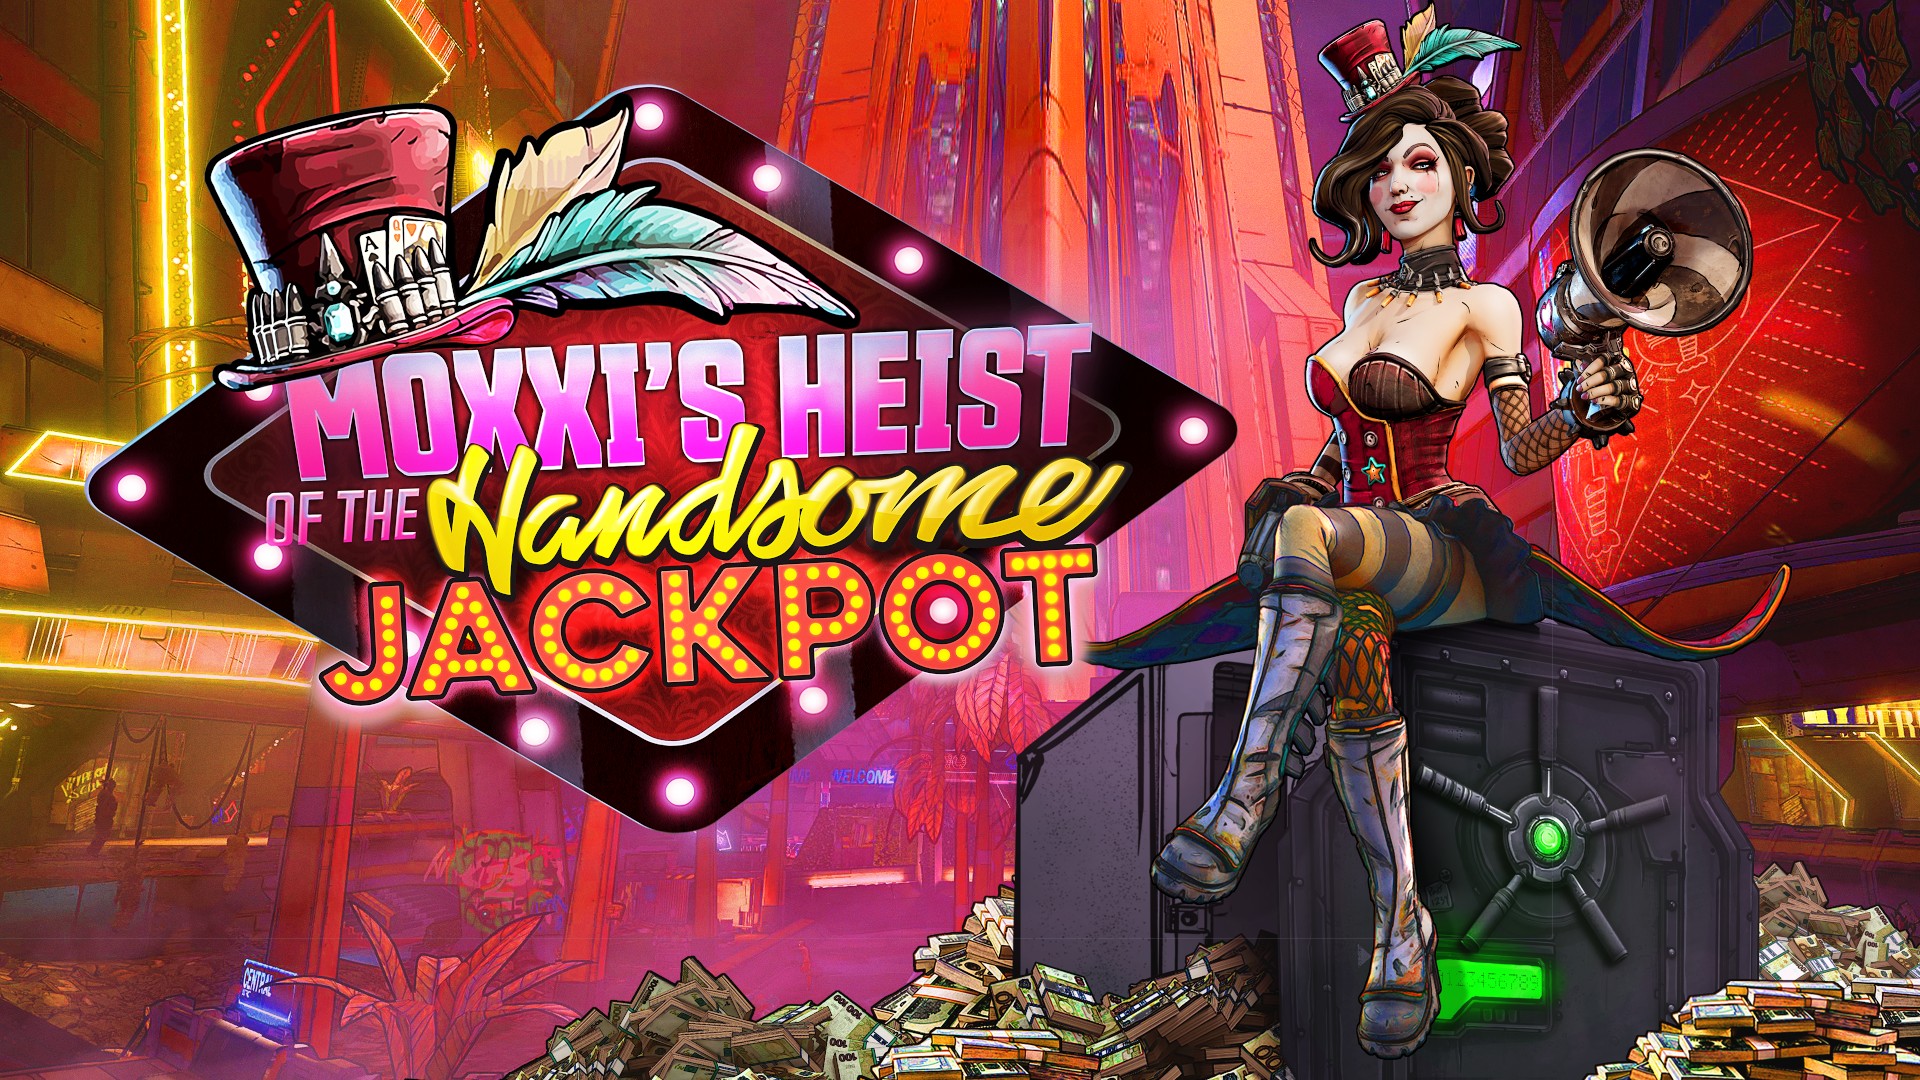 Moxxi Heist of the Handsome Jackpot